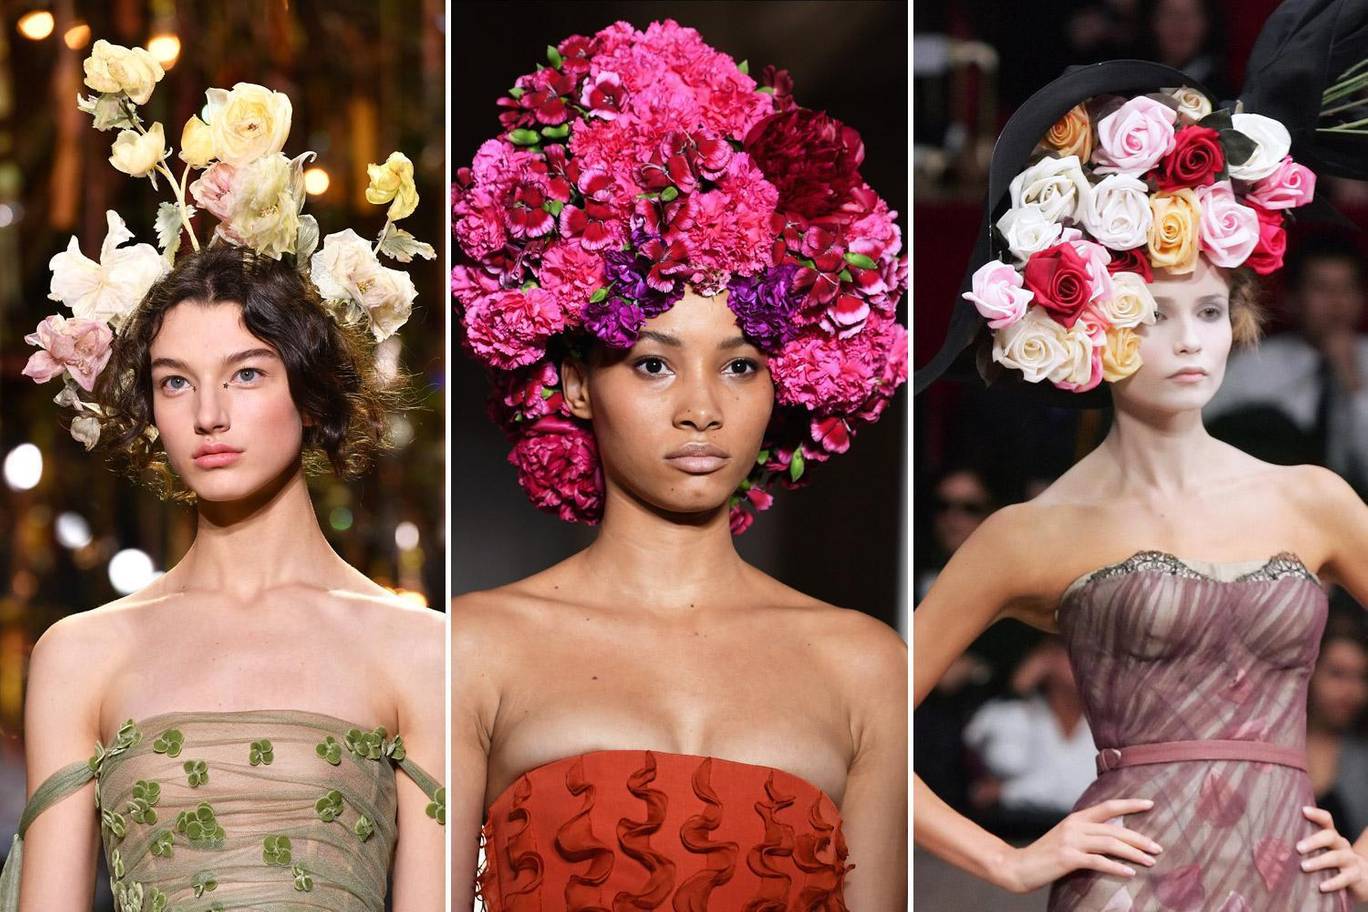 Flower crowns made their way to the runway at Dior, Valentino and Galliano.